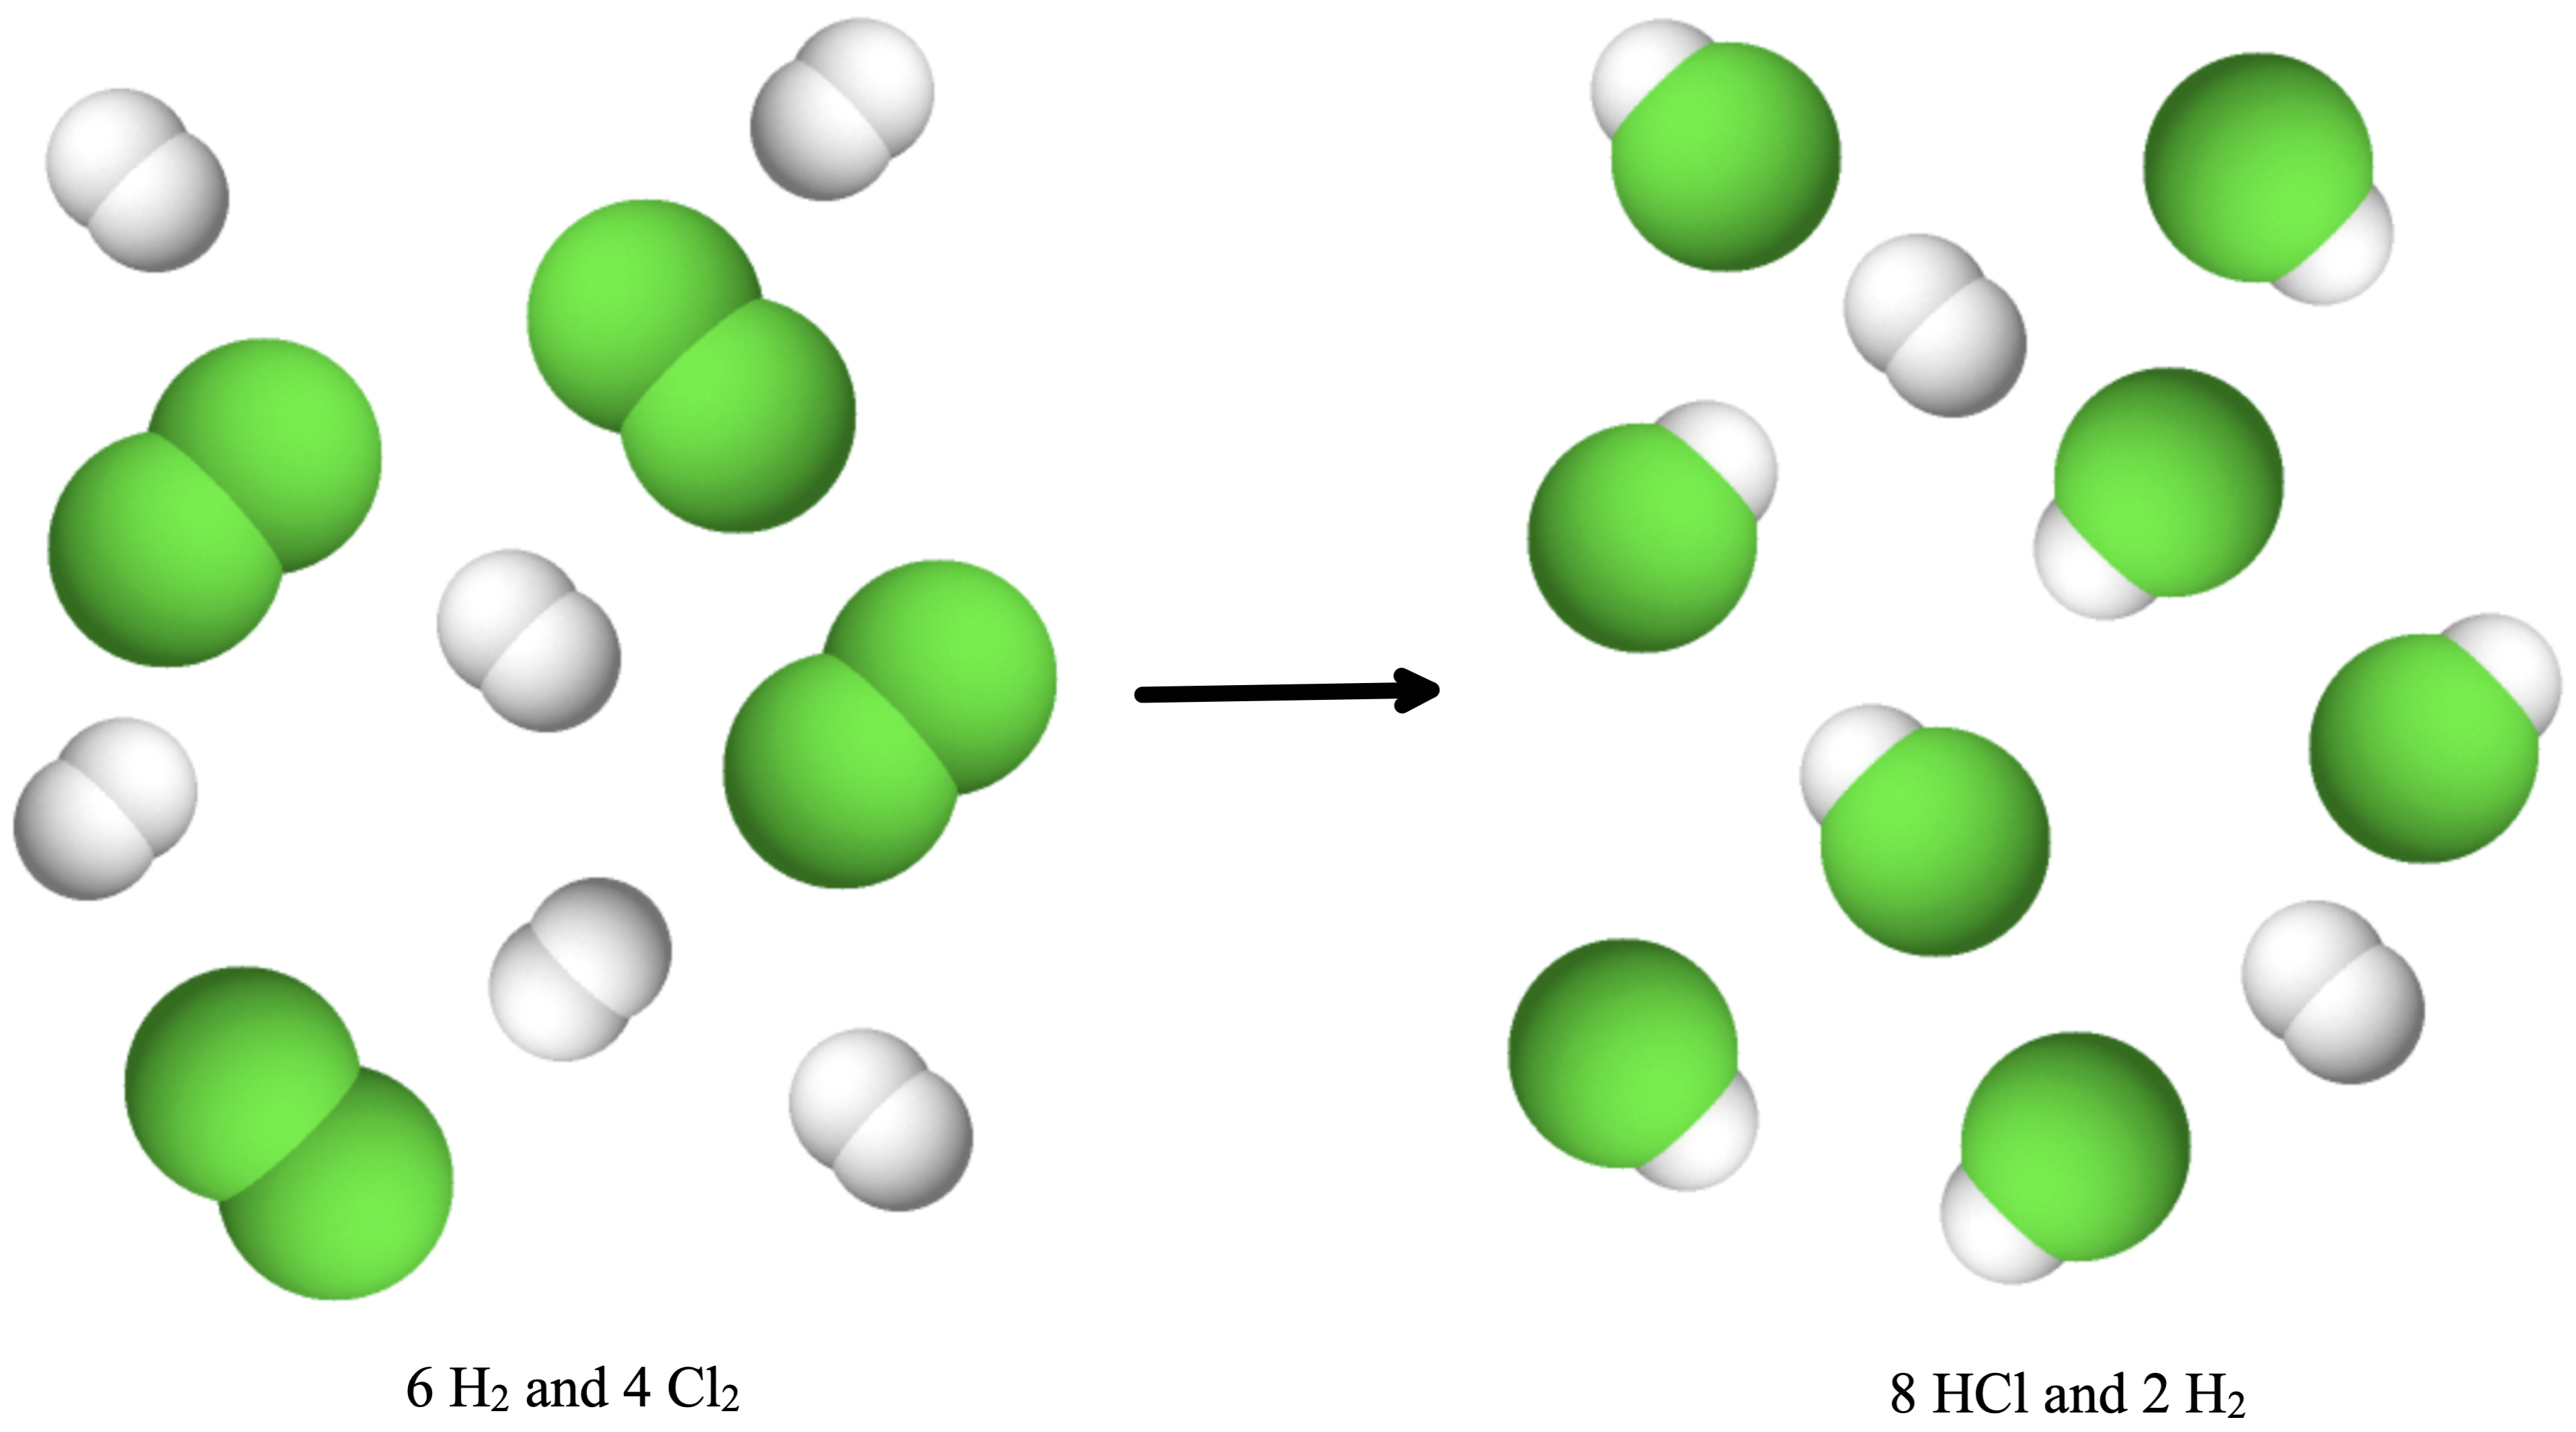 The figure shows a space-filling molecular models reacting. There is a reaction arrow pointing to the right in the middle. To the left of the reaction arrow there are four molecules each consisting of two spheres bonded together representing chlorine. There are also five molecules each consisting of two smaller, white spheres bonded together. Above these molecules is the label, “Before reaction,” and below these molecules is the label, “6 H subscript 2 and 4 C l subscript 2.” To the right of the reaction arrow, there are eight molecules each consisting of one green sphere bonded to a smaller white sphere. There are also two molecules each consisting of two white spheres bonded together representing hydrogen. To the right of the reaction arrow, there are 8 molecules of 2 bonded spheres representing HCl and 2 molecules of 2 bonded spheres representing H2.